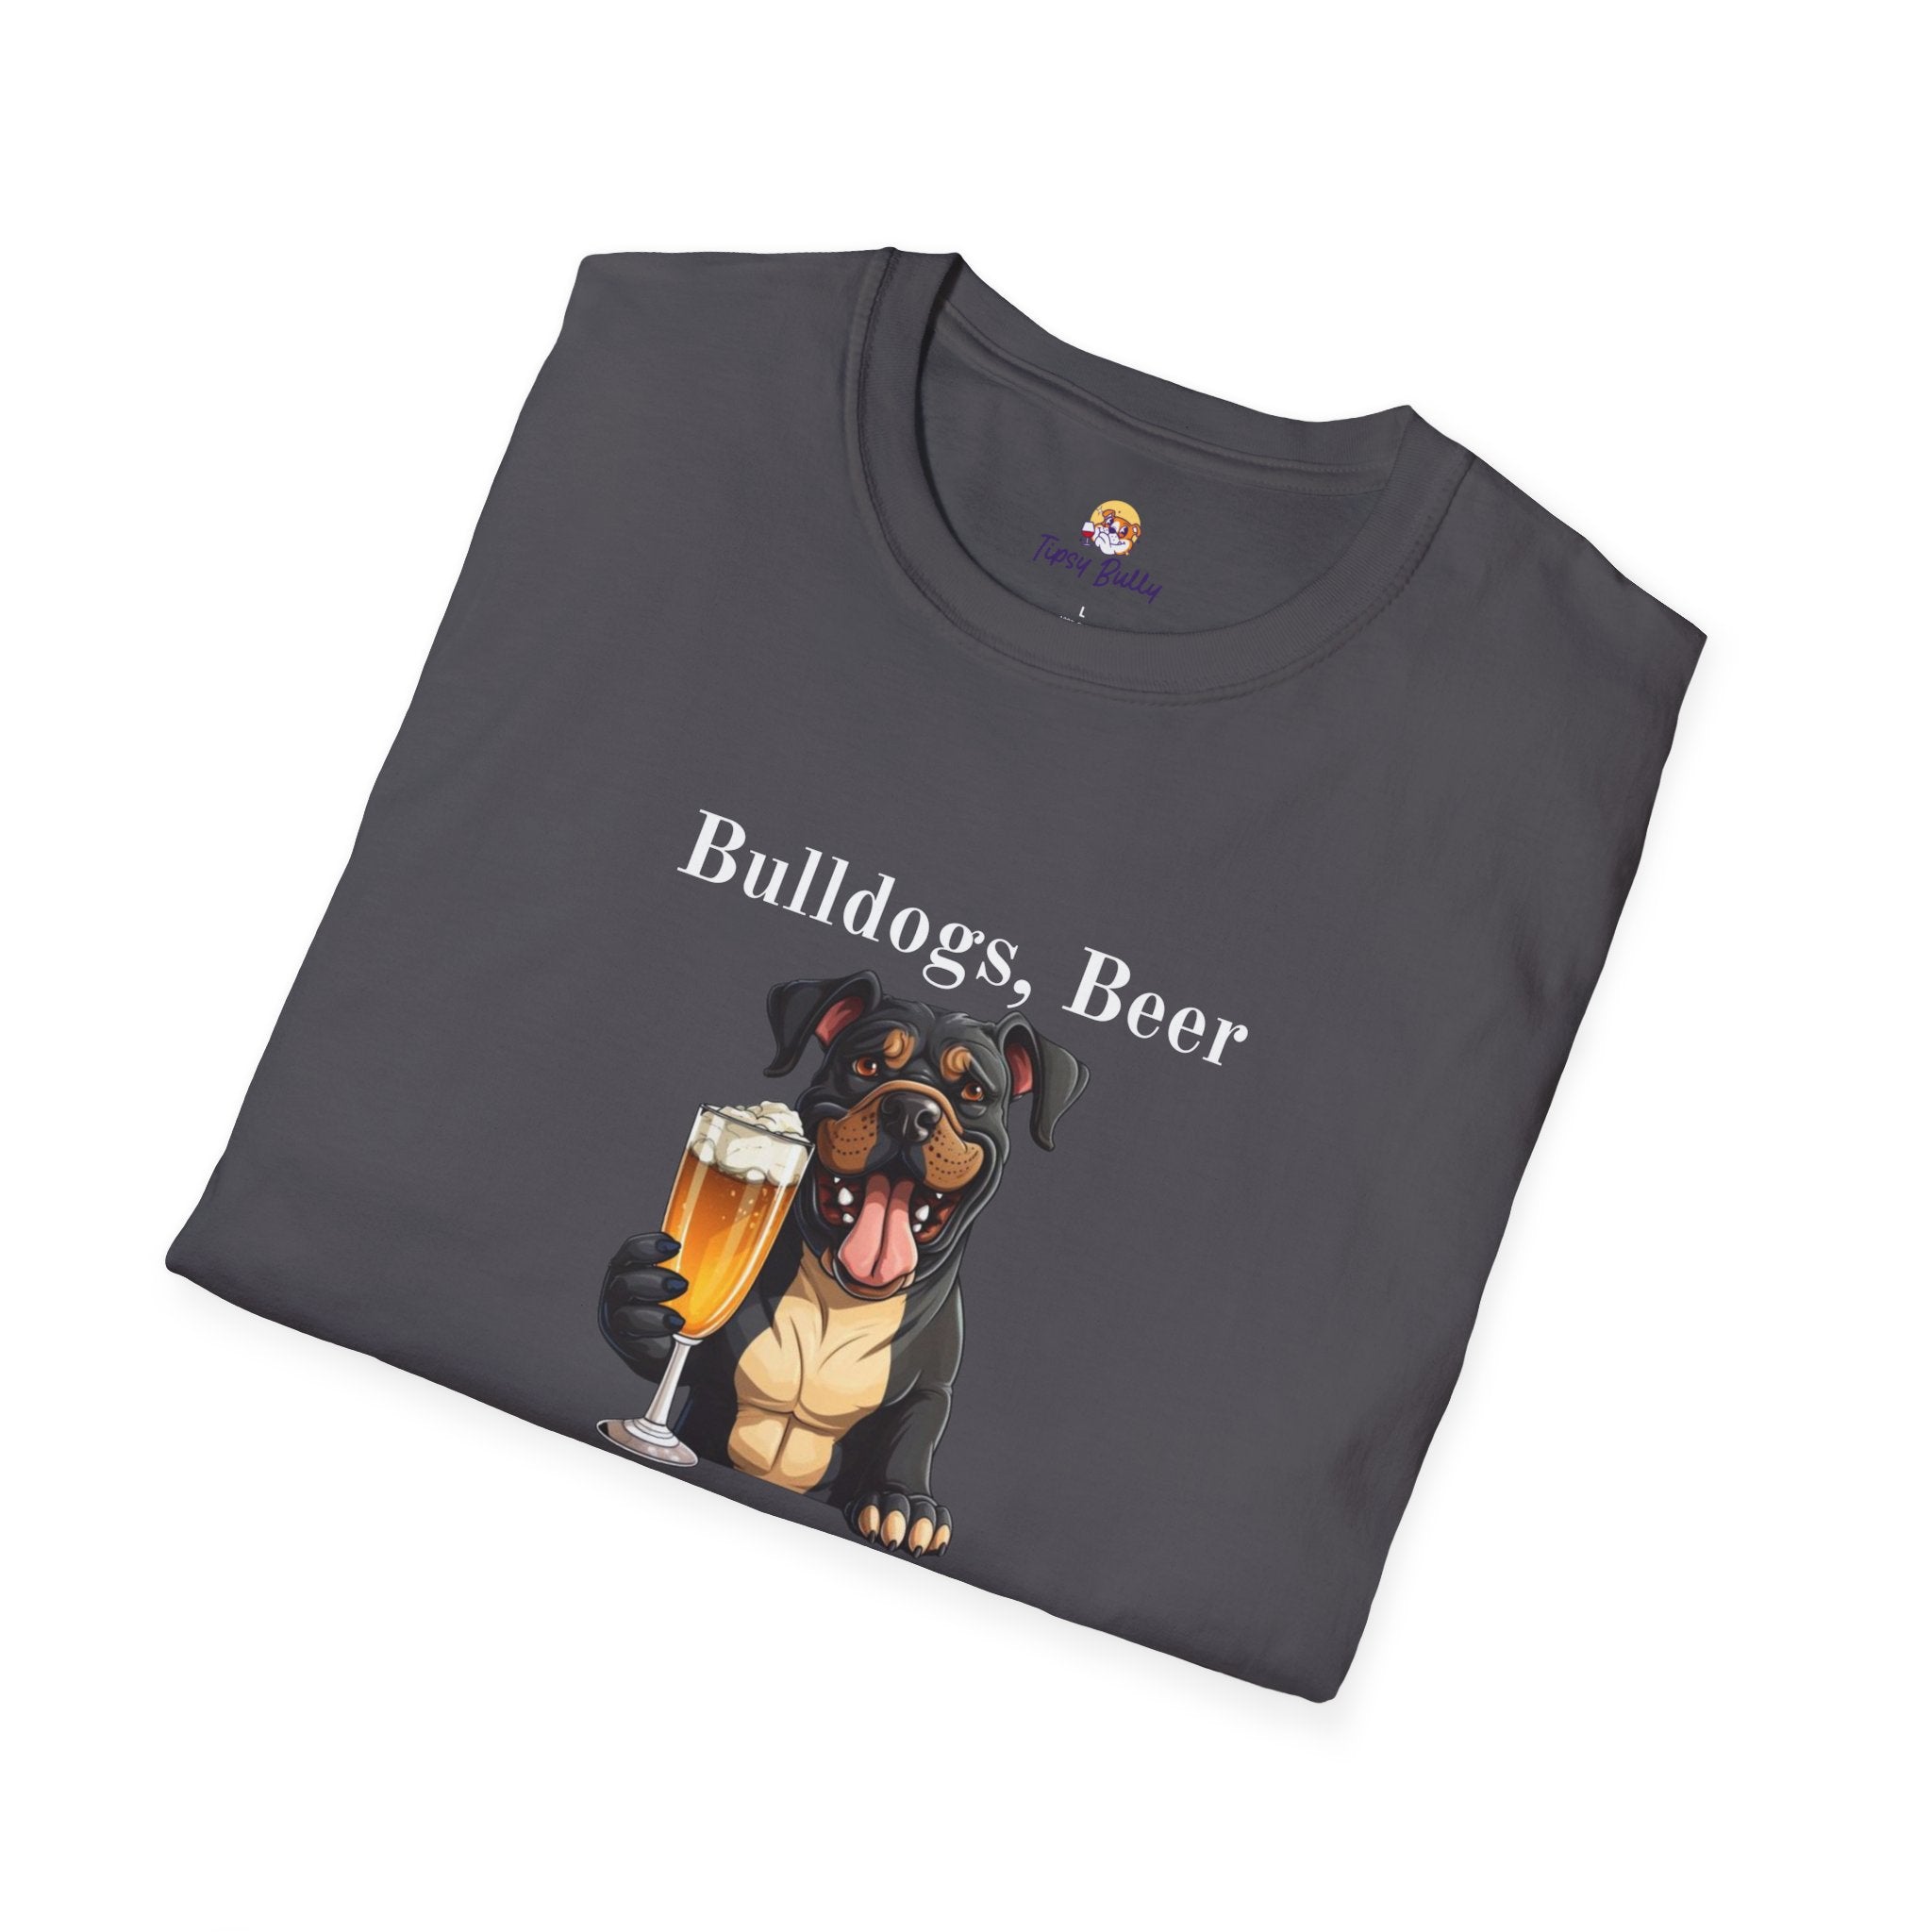 Bulldogs, Beer, and Bad Decisions" Unisex T-Shirt by Tipsy Bully (American/Black)